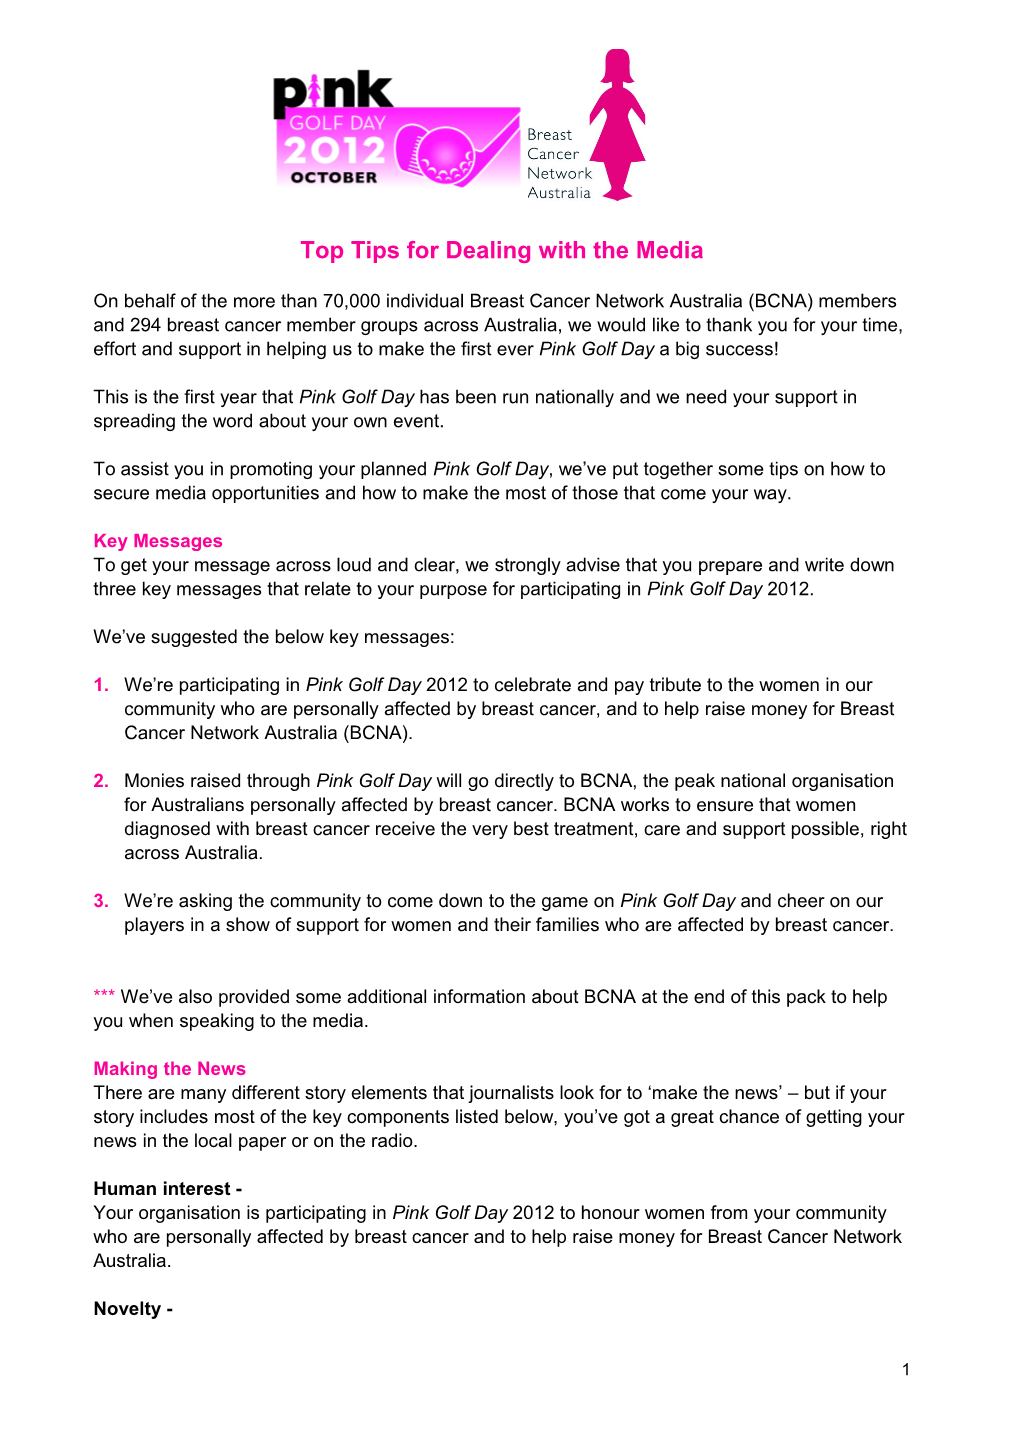 Top Tips for Dealing with the Media